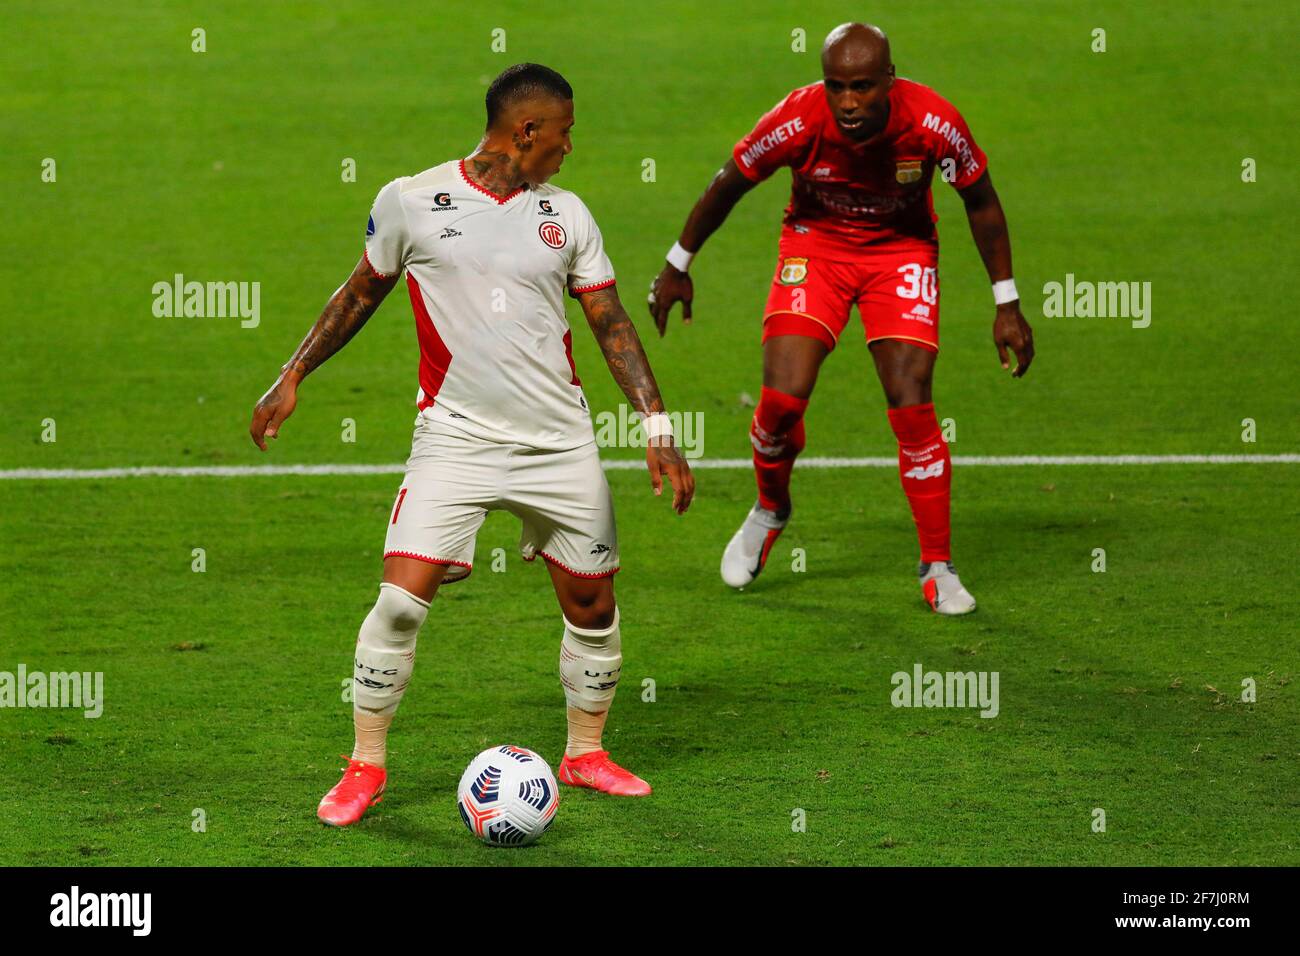 Lima, Peru. 07th Apr, 2021. Jeickson Reyes from Sport Huancayo during a  match between Sport Huancayo vs UTC Cajamarca played at the National  Stadium of Peru, in Lima, Peru. Game valid for